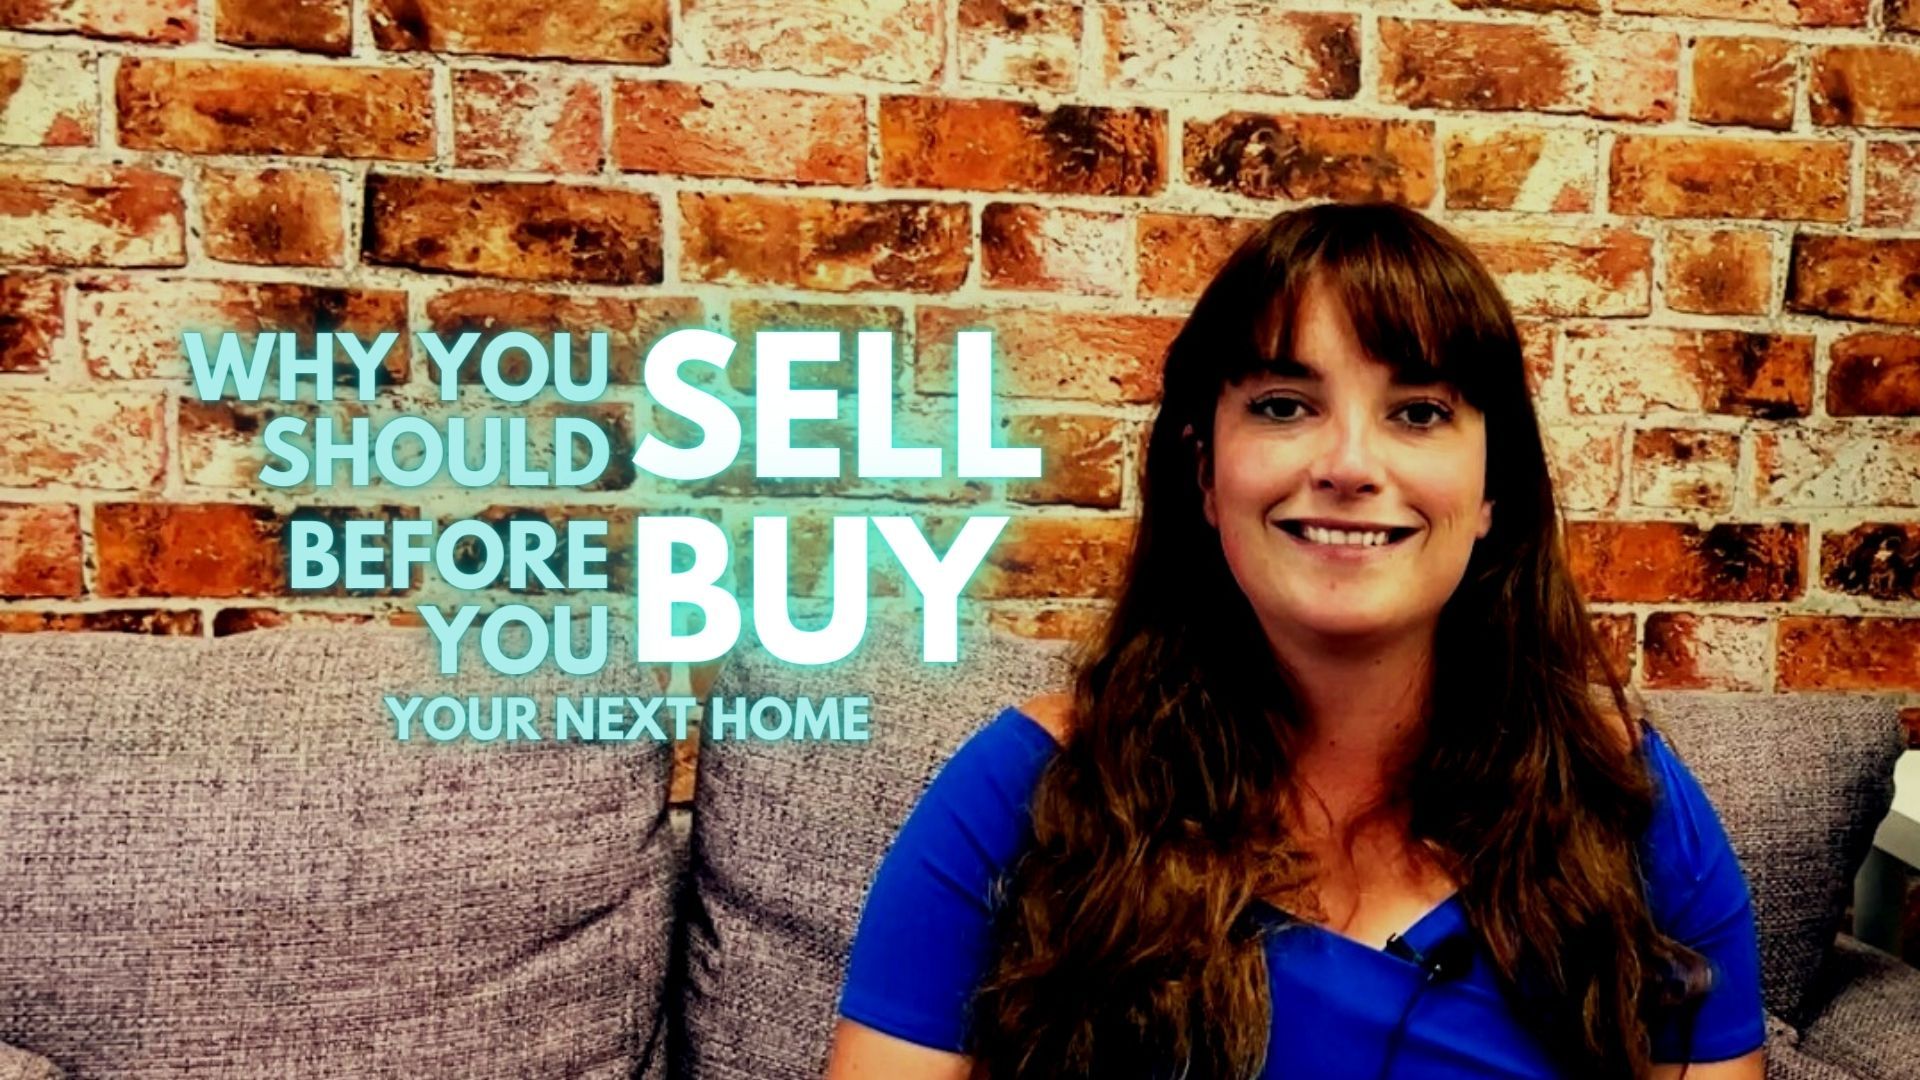 VIDEO: Why You Should Sell Before You Buy Your Next Home